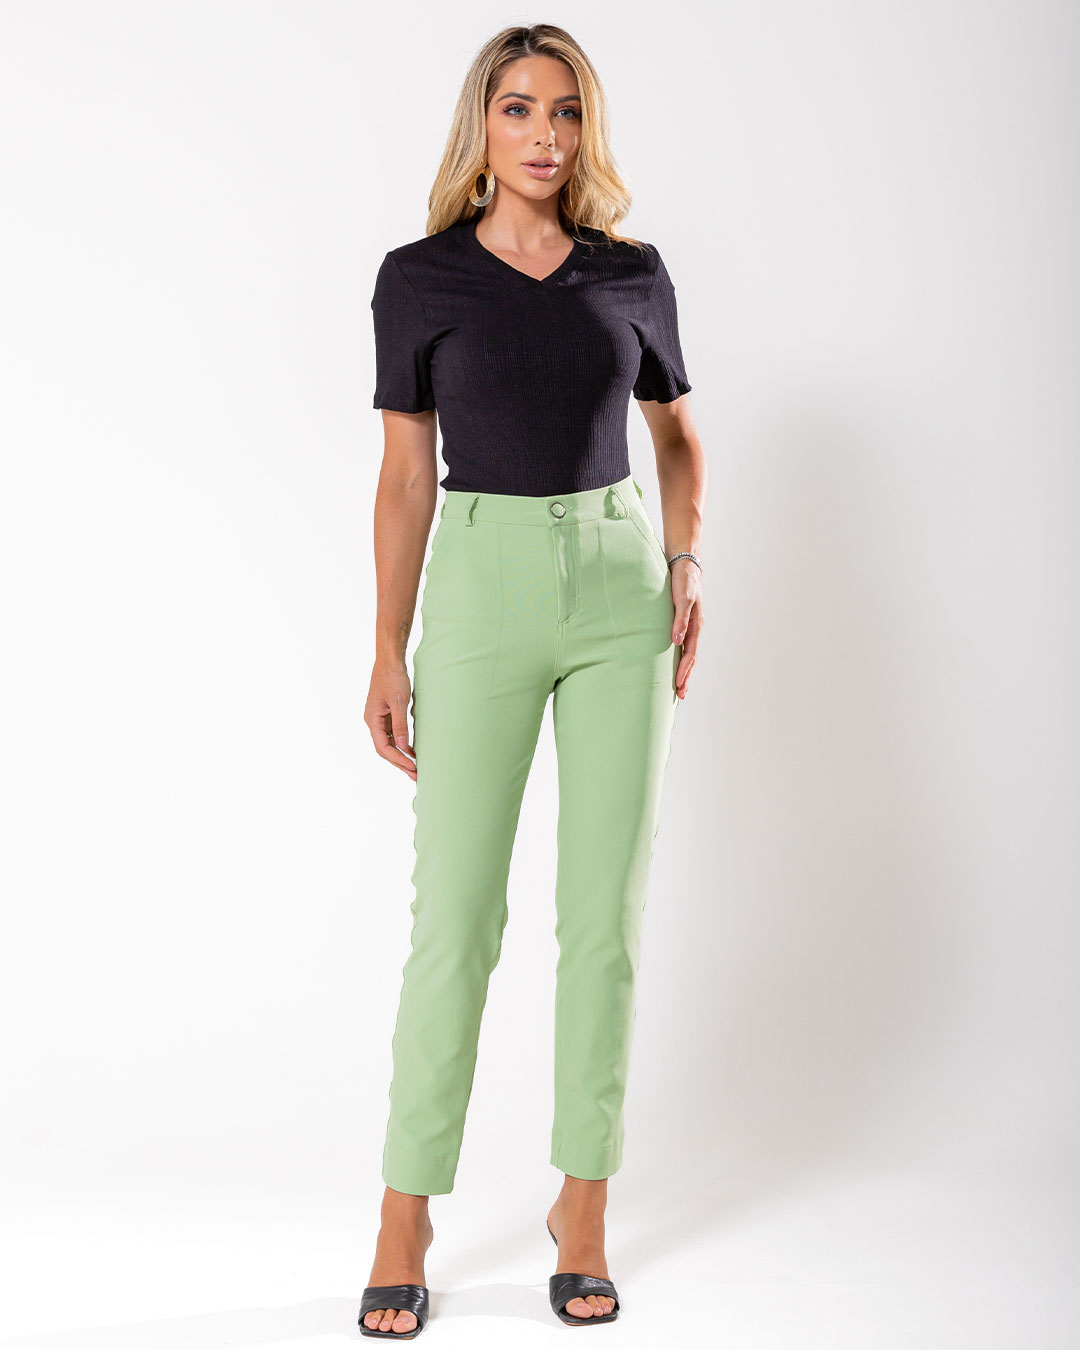 Miss Misses - Pants Miss Misses Tailoring With Pockets Green - 54068023